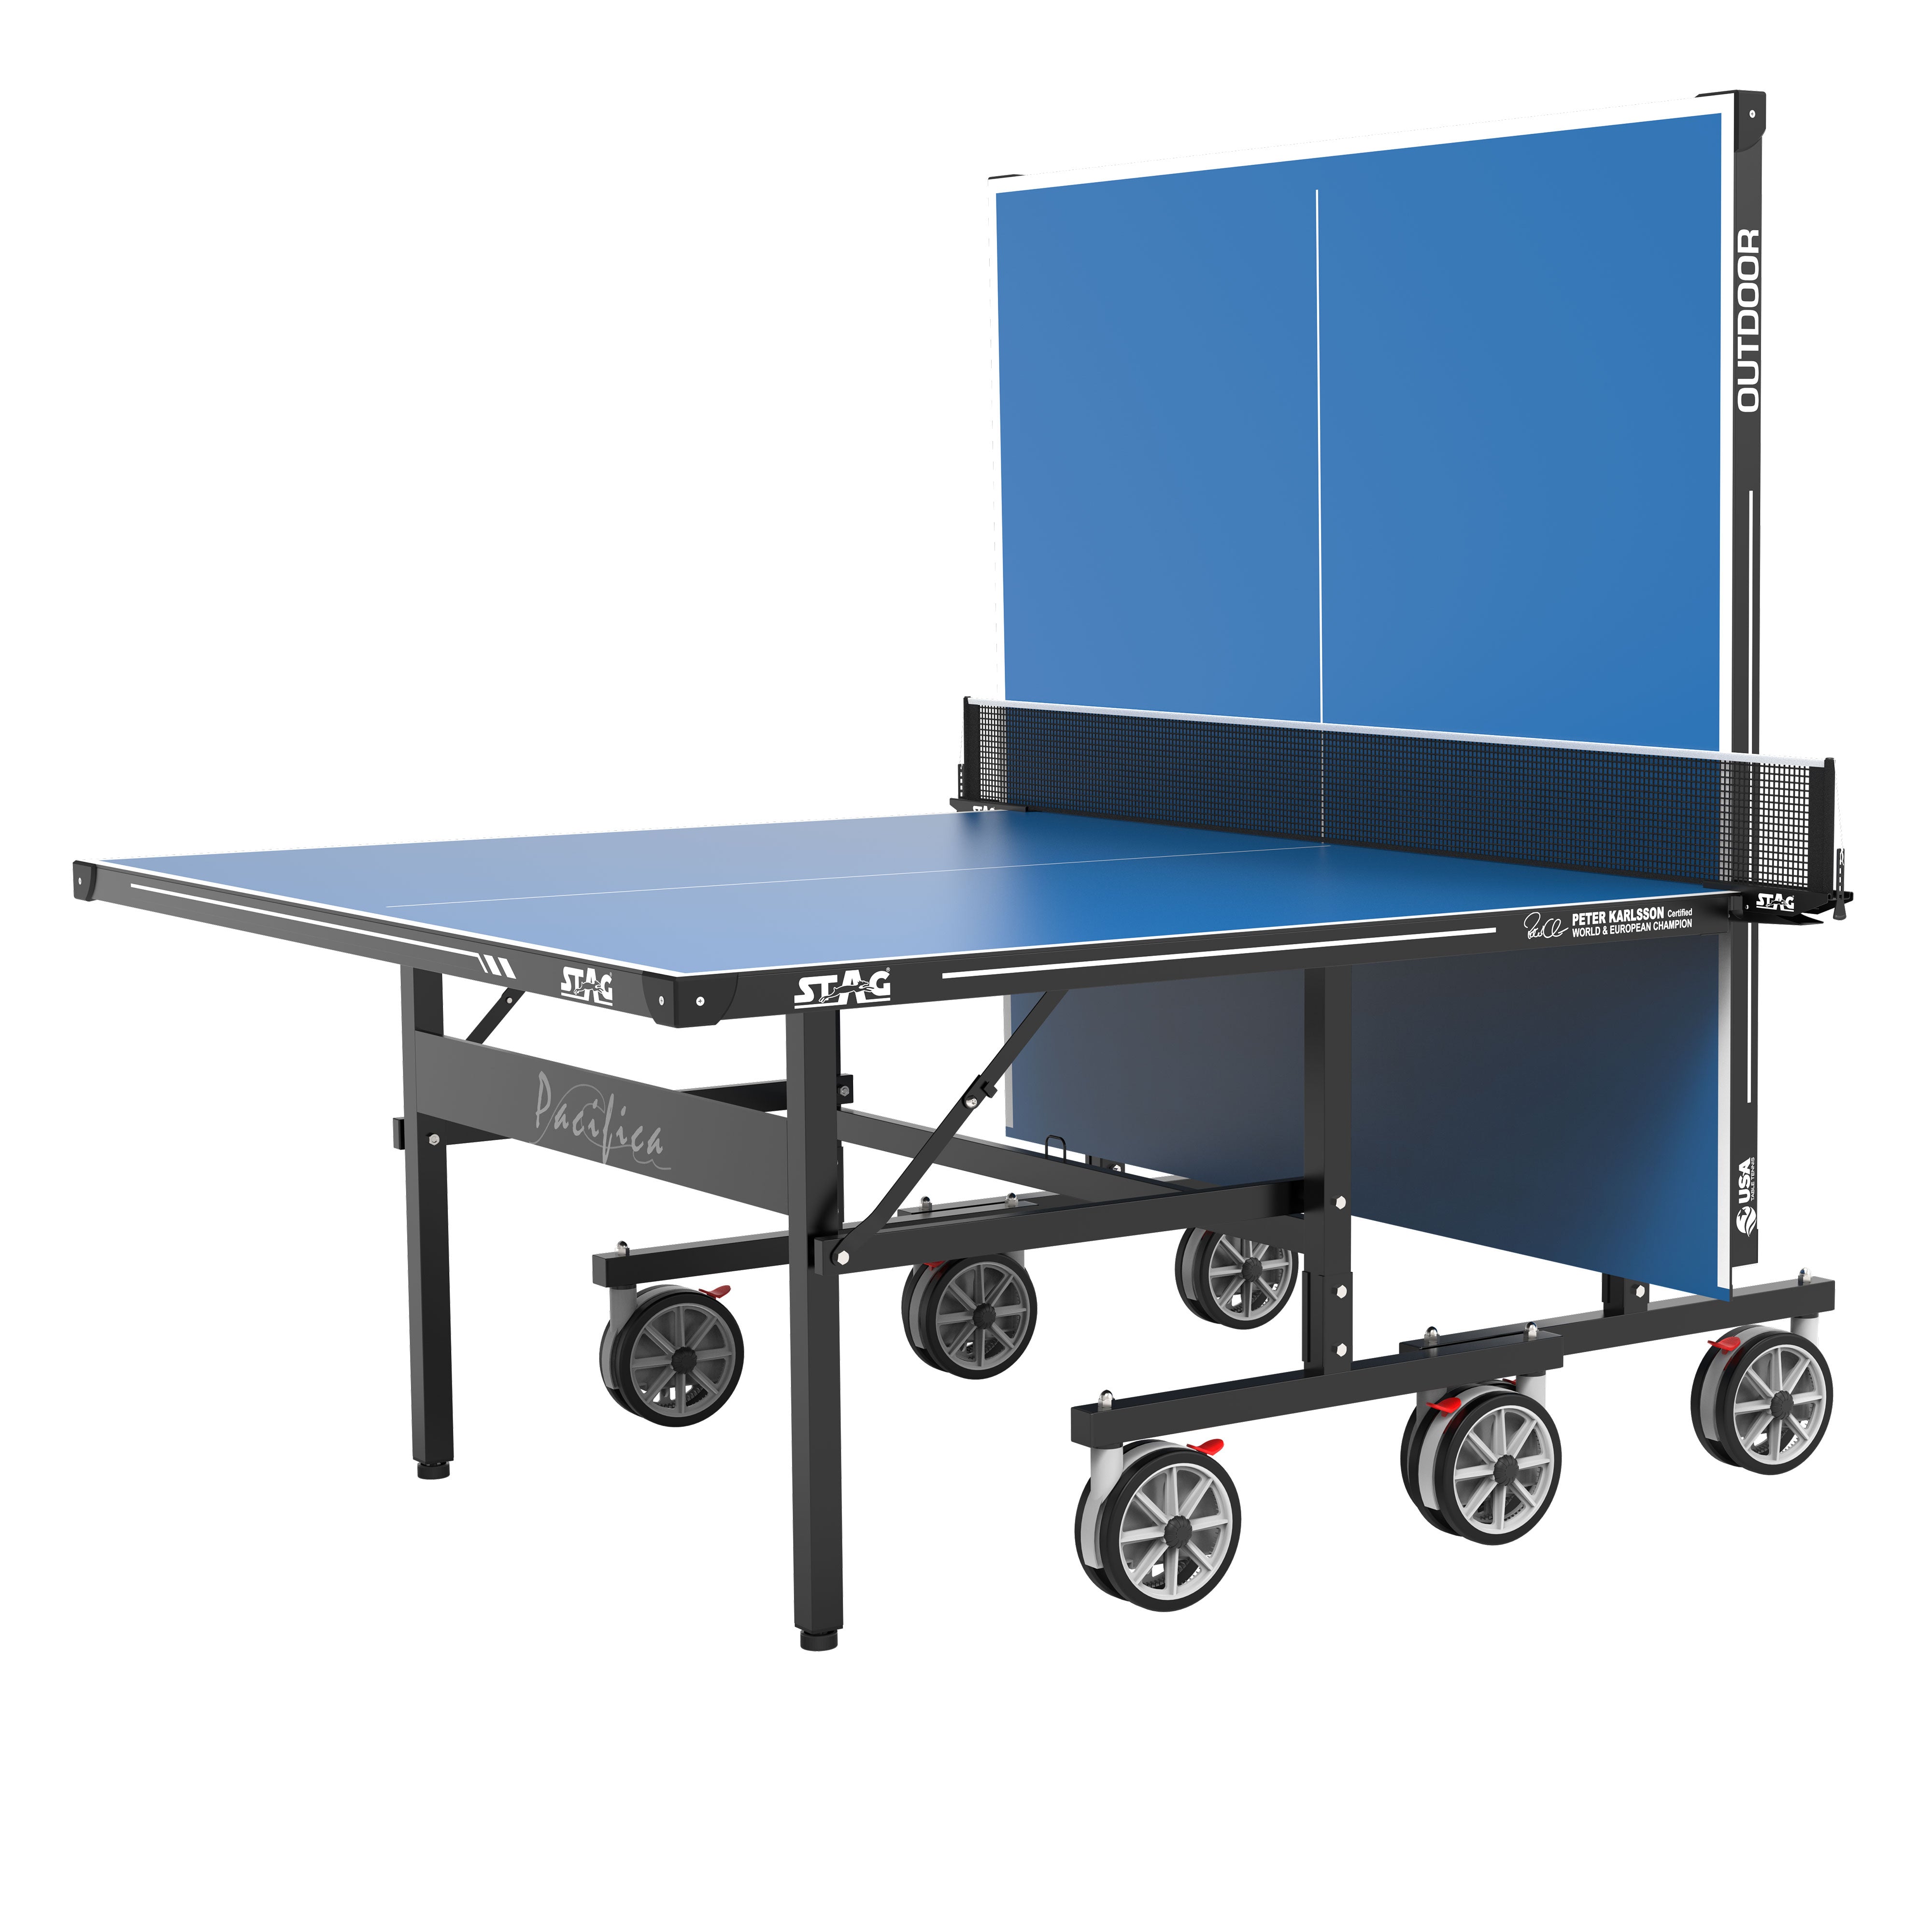 Pacifica Blue Outdoor Table Tennis Table - 2-Player Bundle